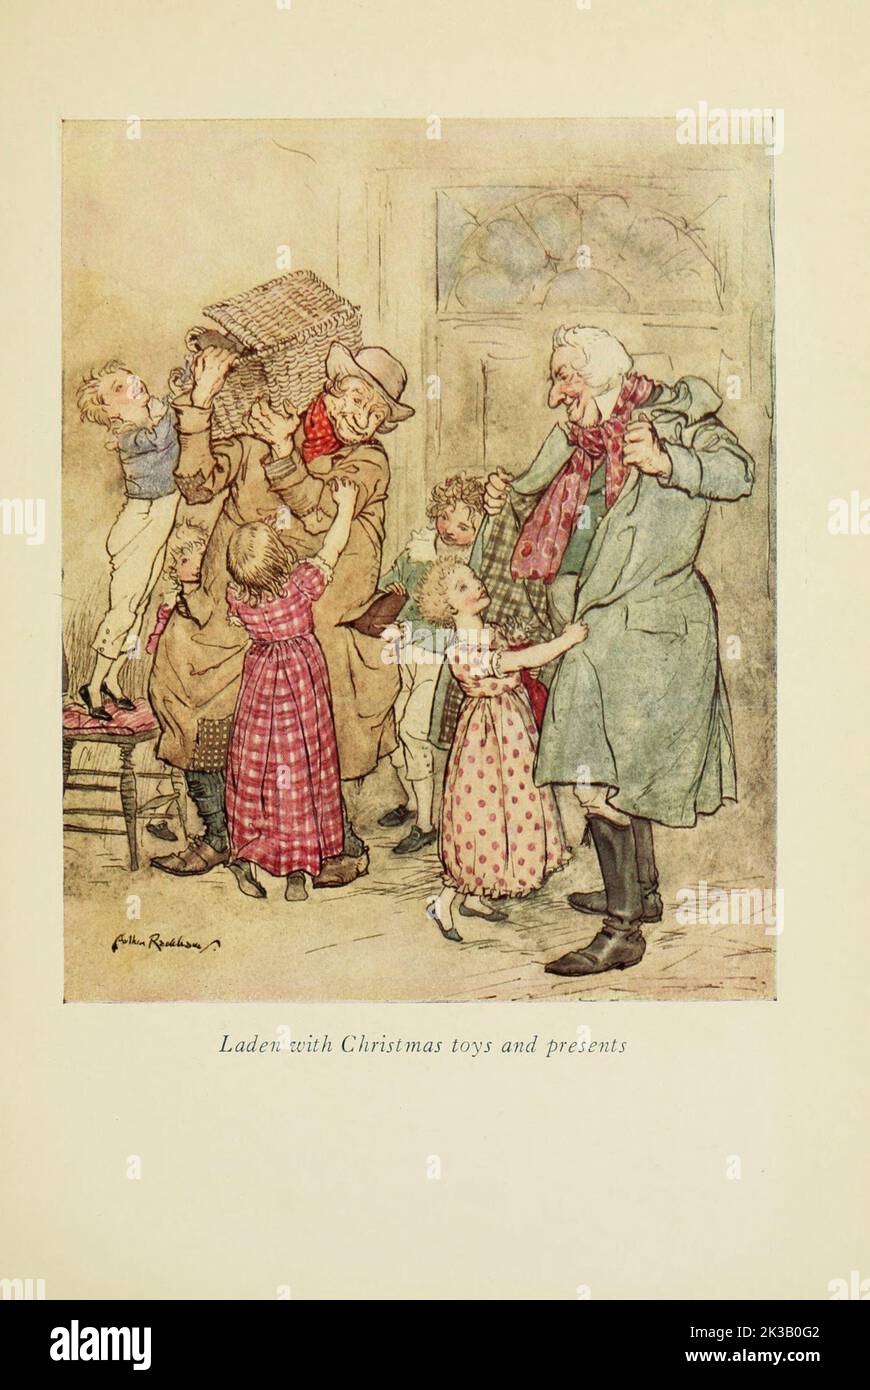 Laden with Christmas toys and presents Illustrated by Arthur Rackham from the book ' A Christmas carol ' by Charles Dickens, Publication date 1915 Publisher London : William Heinemann ; Philadelphia : J.B. Lippincott Co. Stock Photo